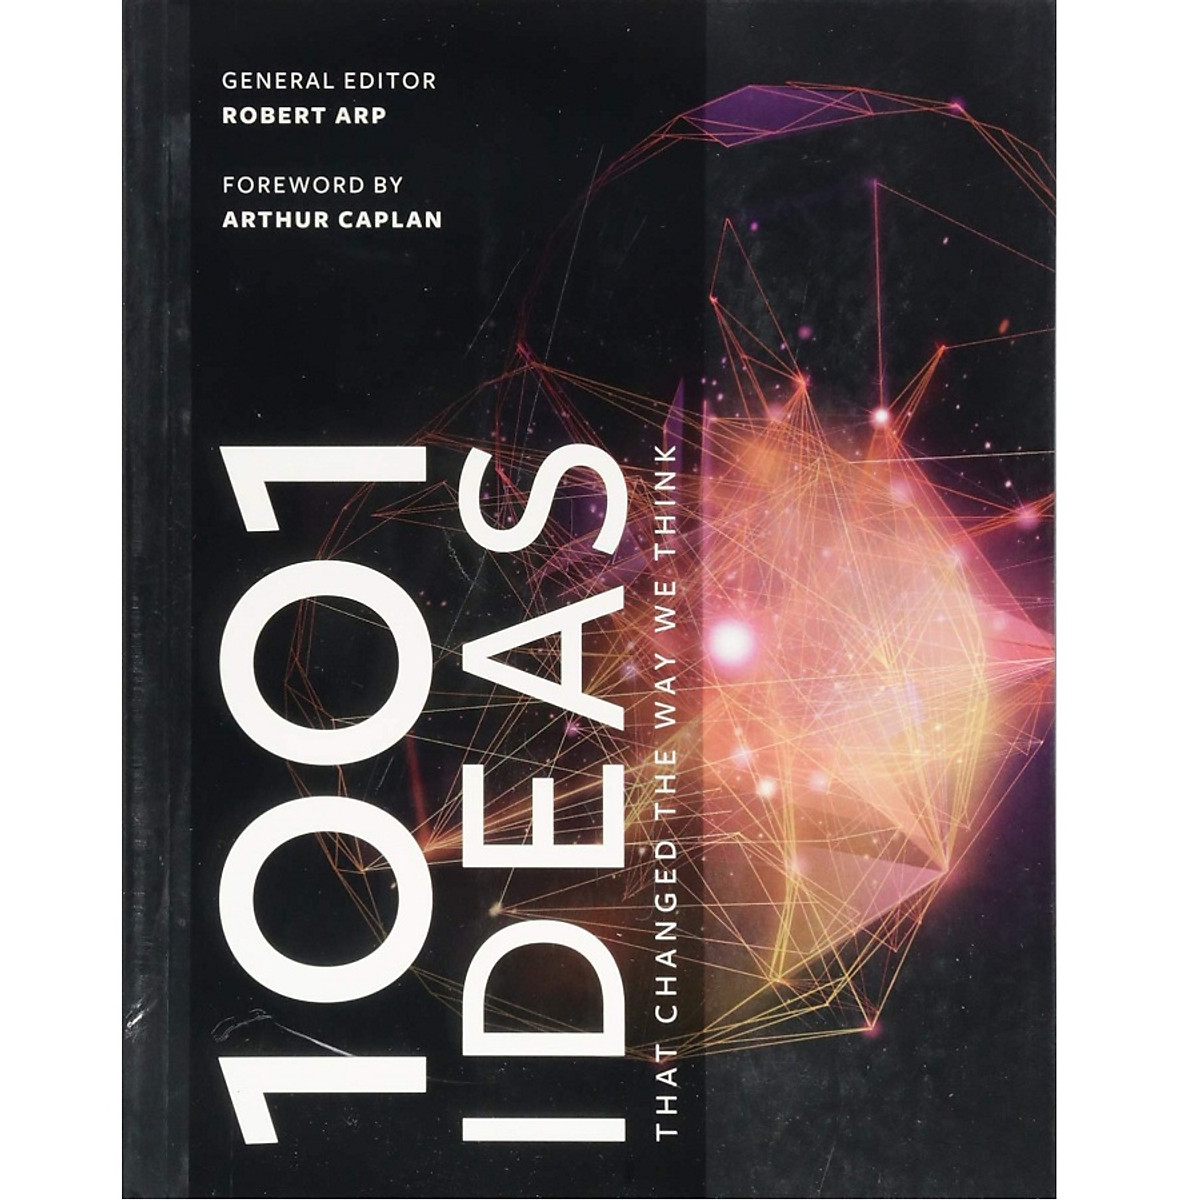 1001 Ideas that Changed the Way We Think